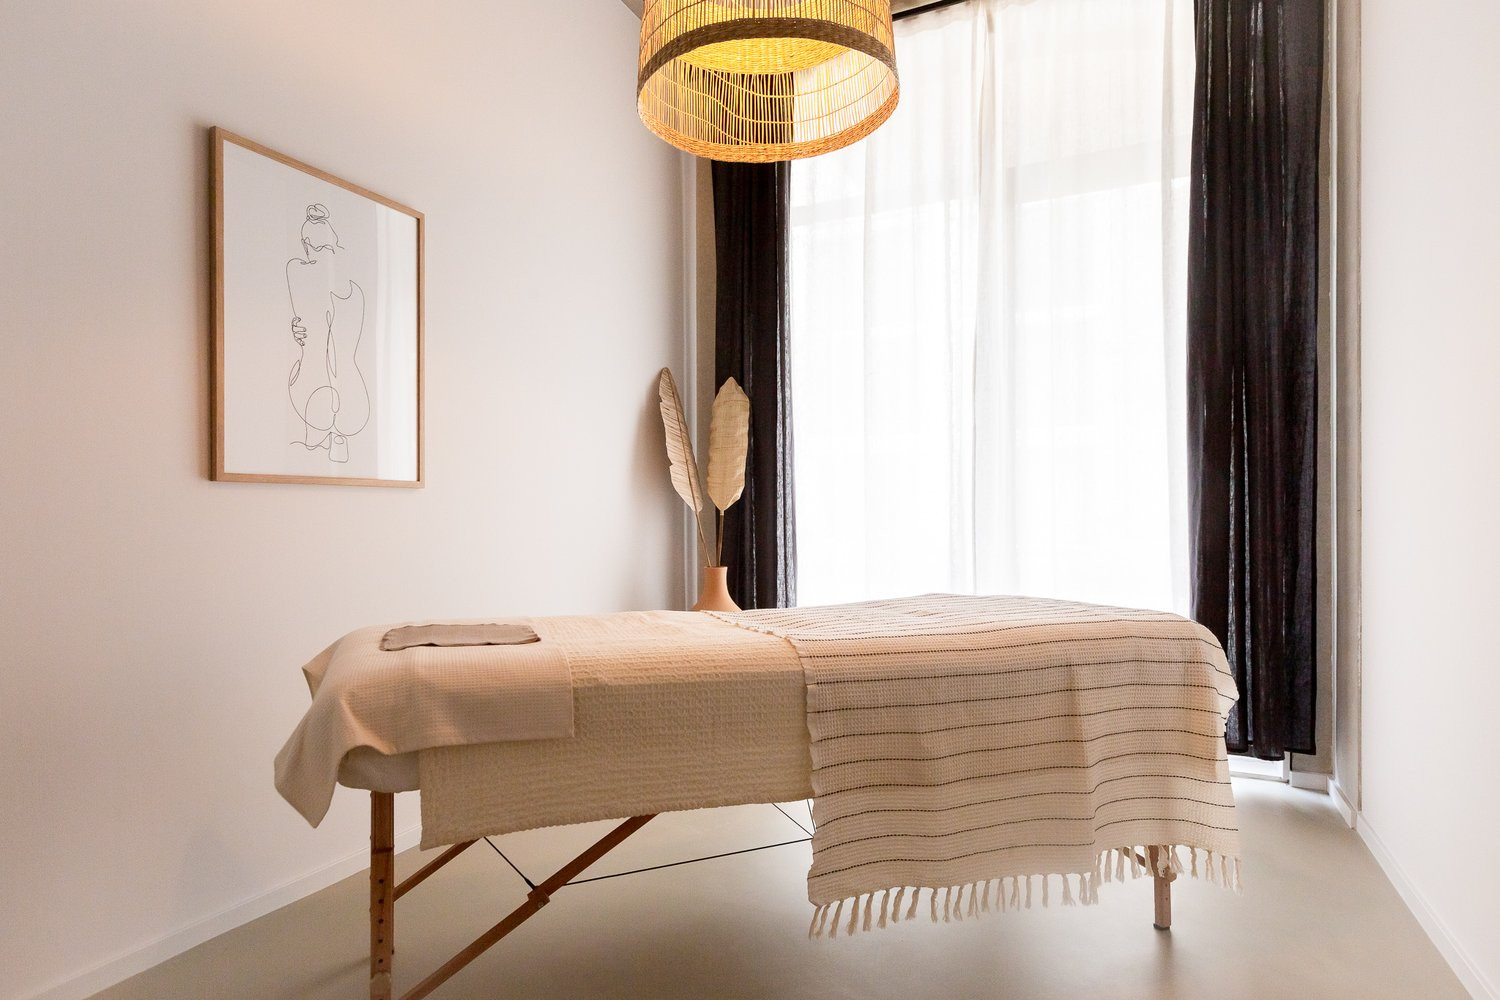 Massage And Spa Services Amsterdam | Sculpt Your Body in 30 Minutes